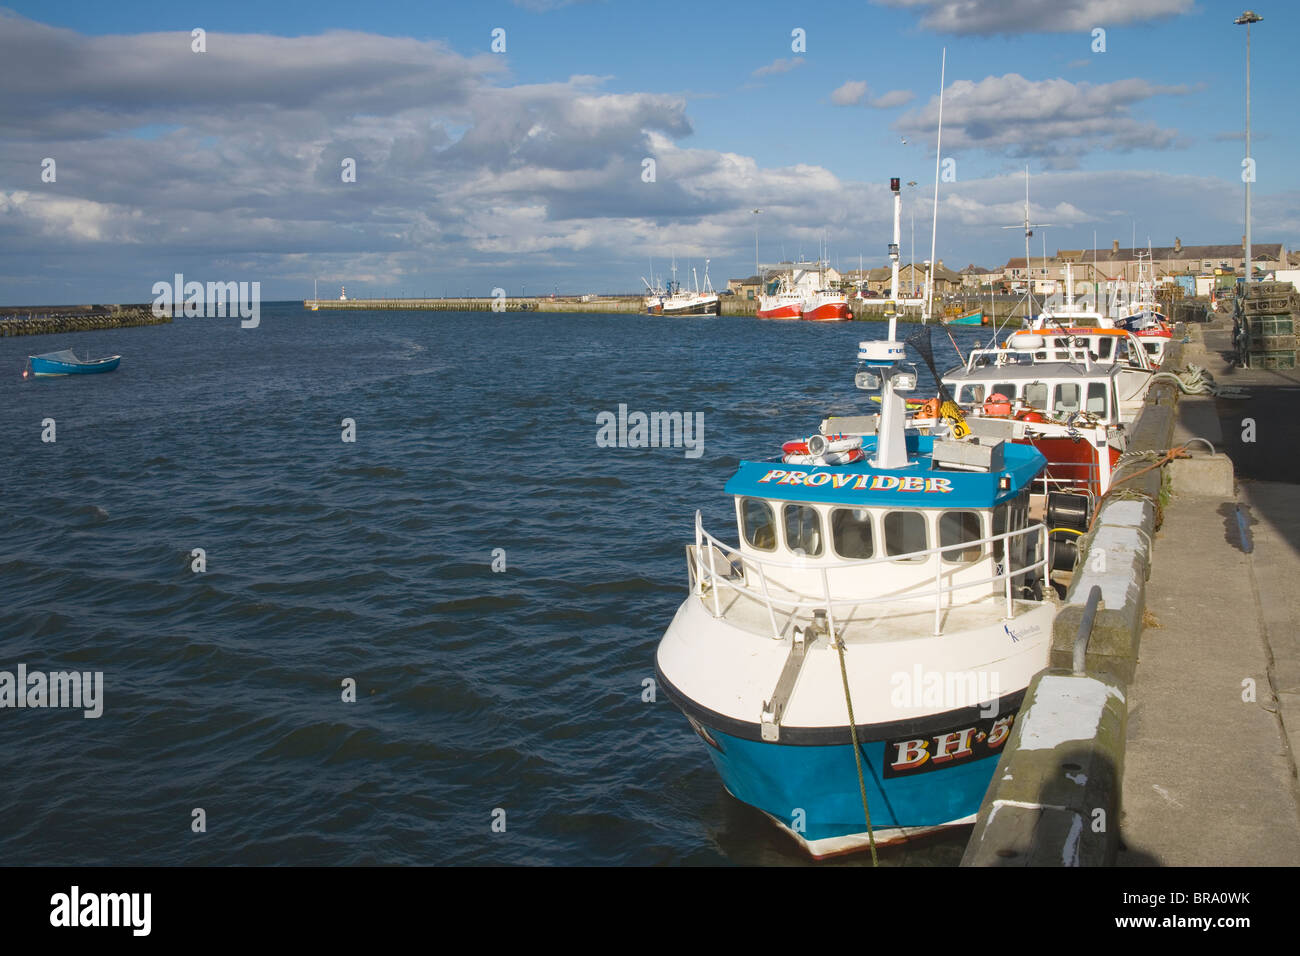 Amble Harbour High Resolution Stock Photography and Images - Alamy